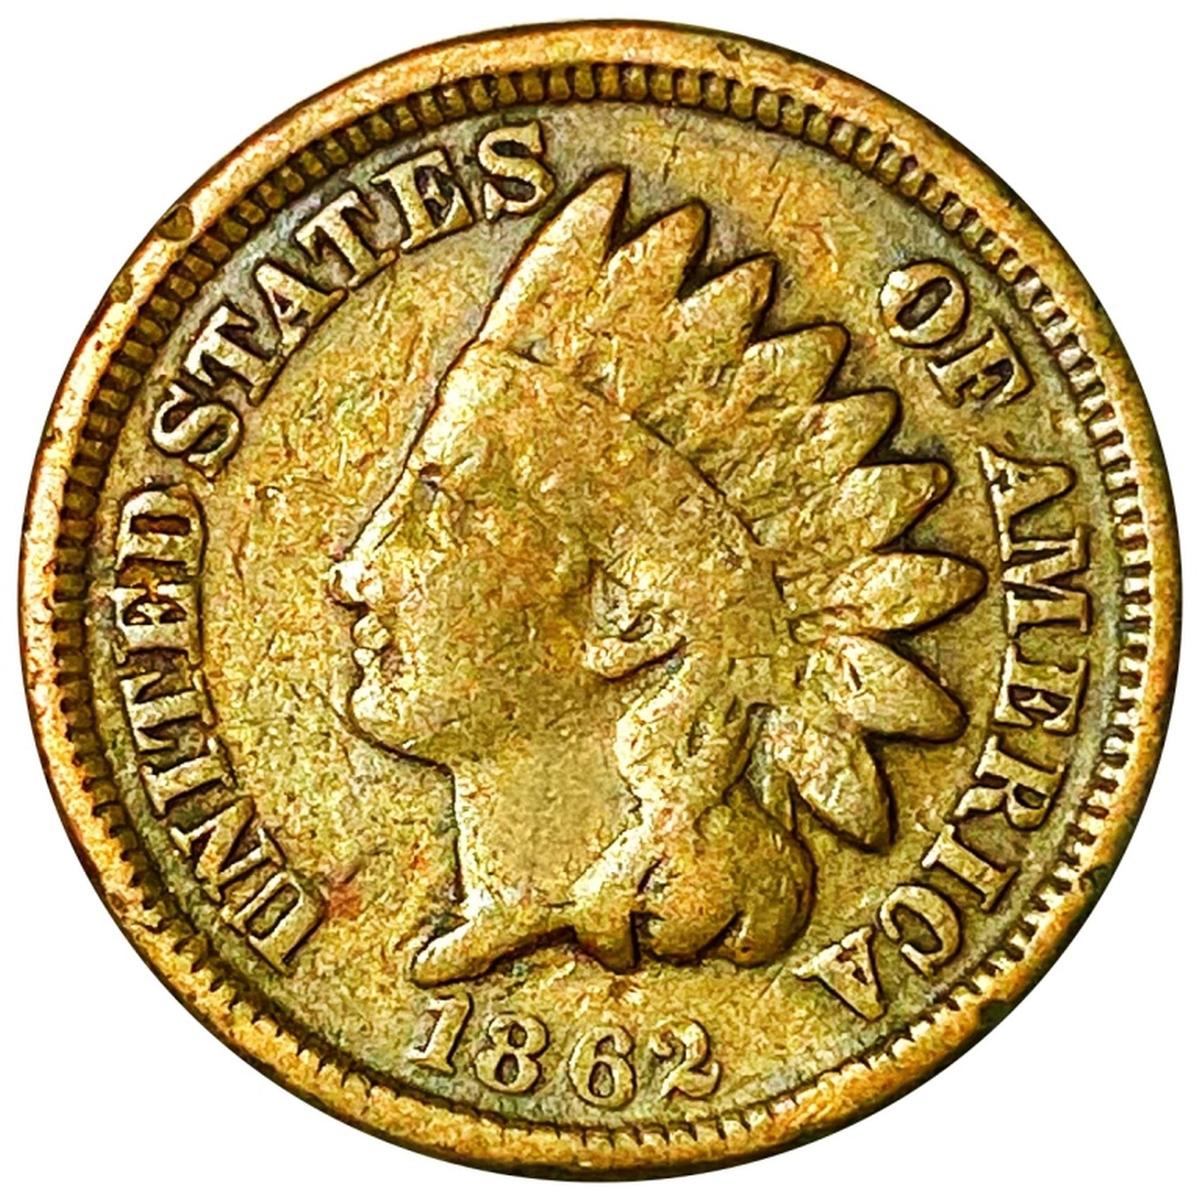 1862 Indian Head Penny NICELY CIRCULATED